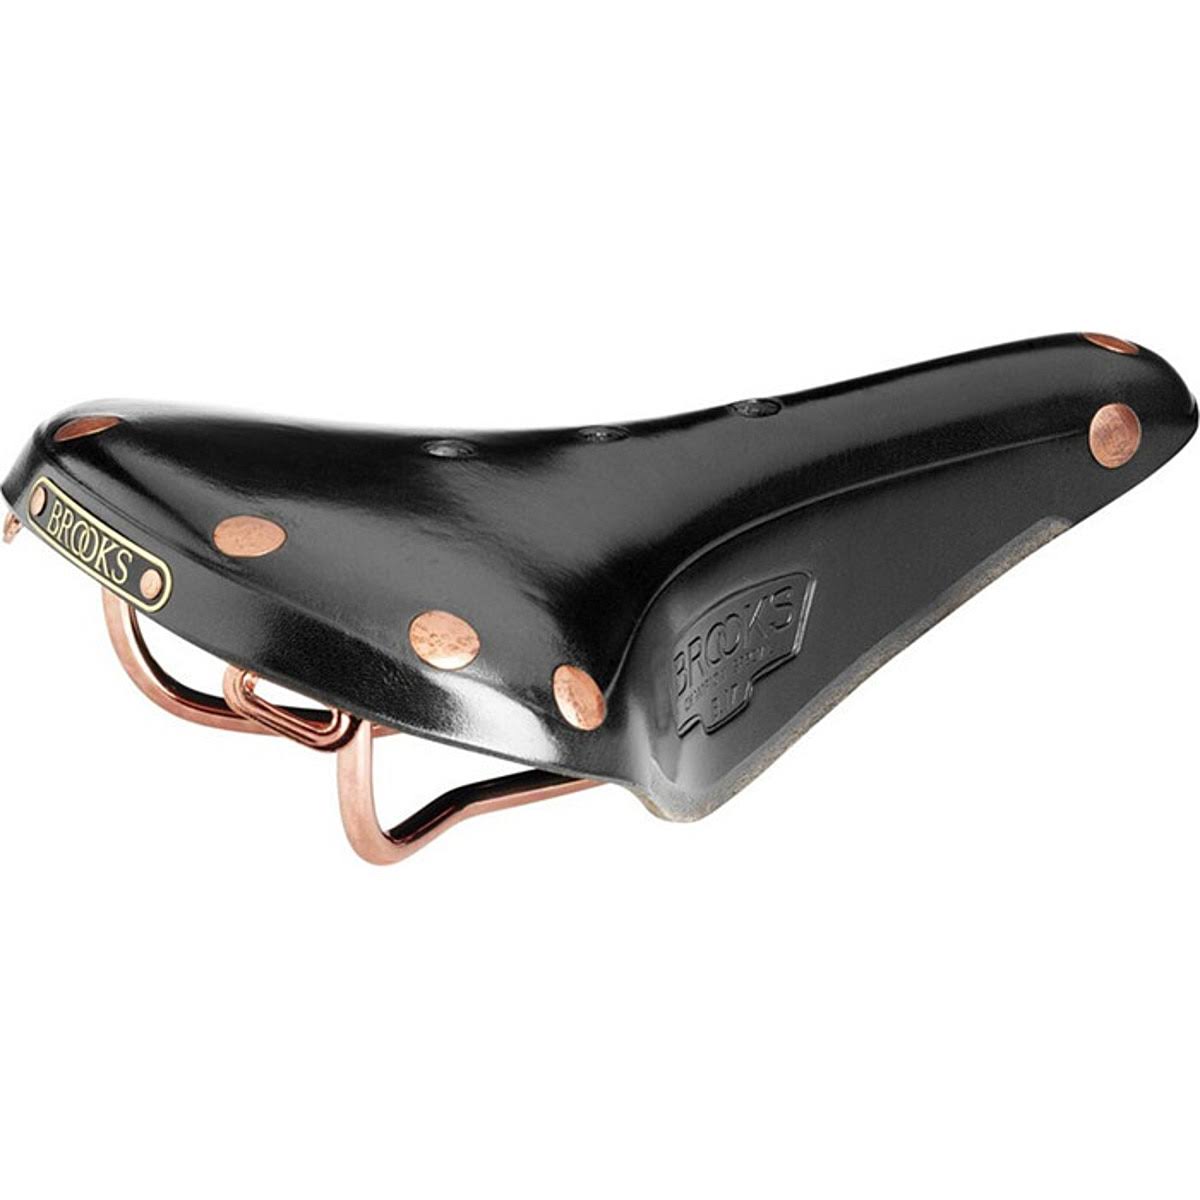 Brooks B17 Special Bicycle Saddle - Black & Copper